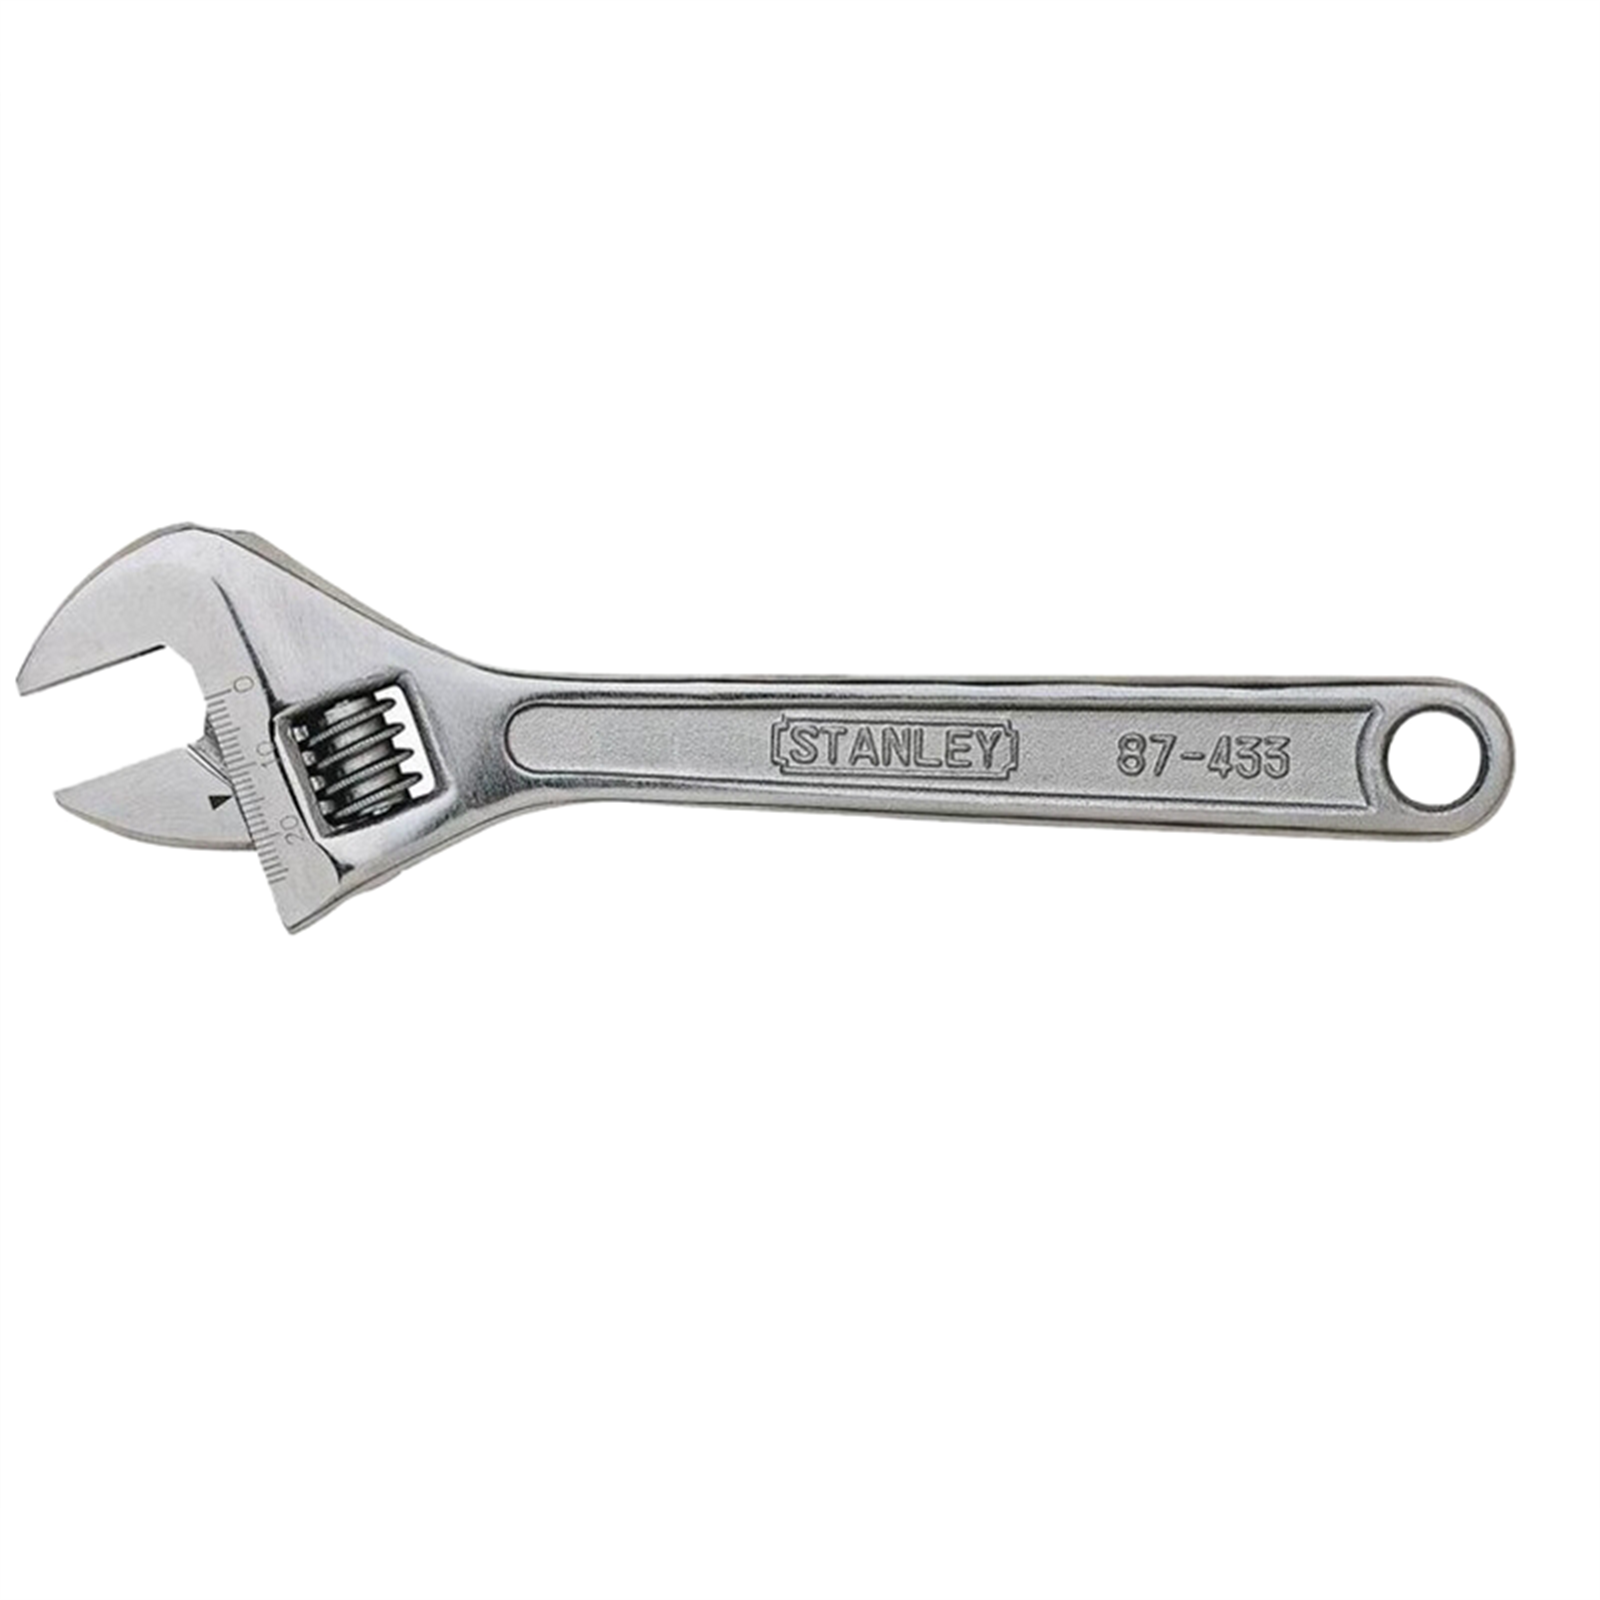 Stanley 250mm Adjustable Wrench